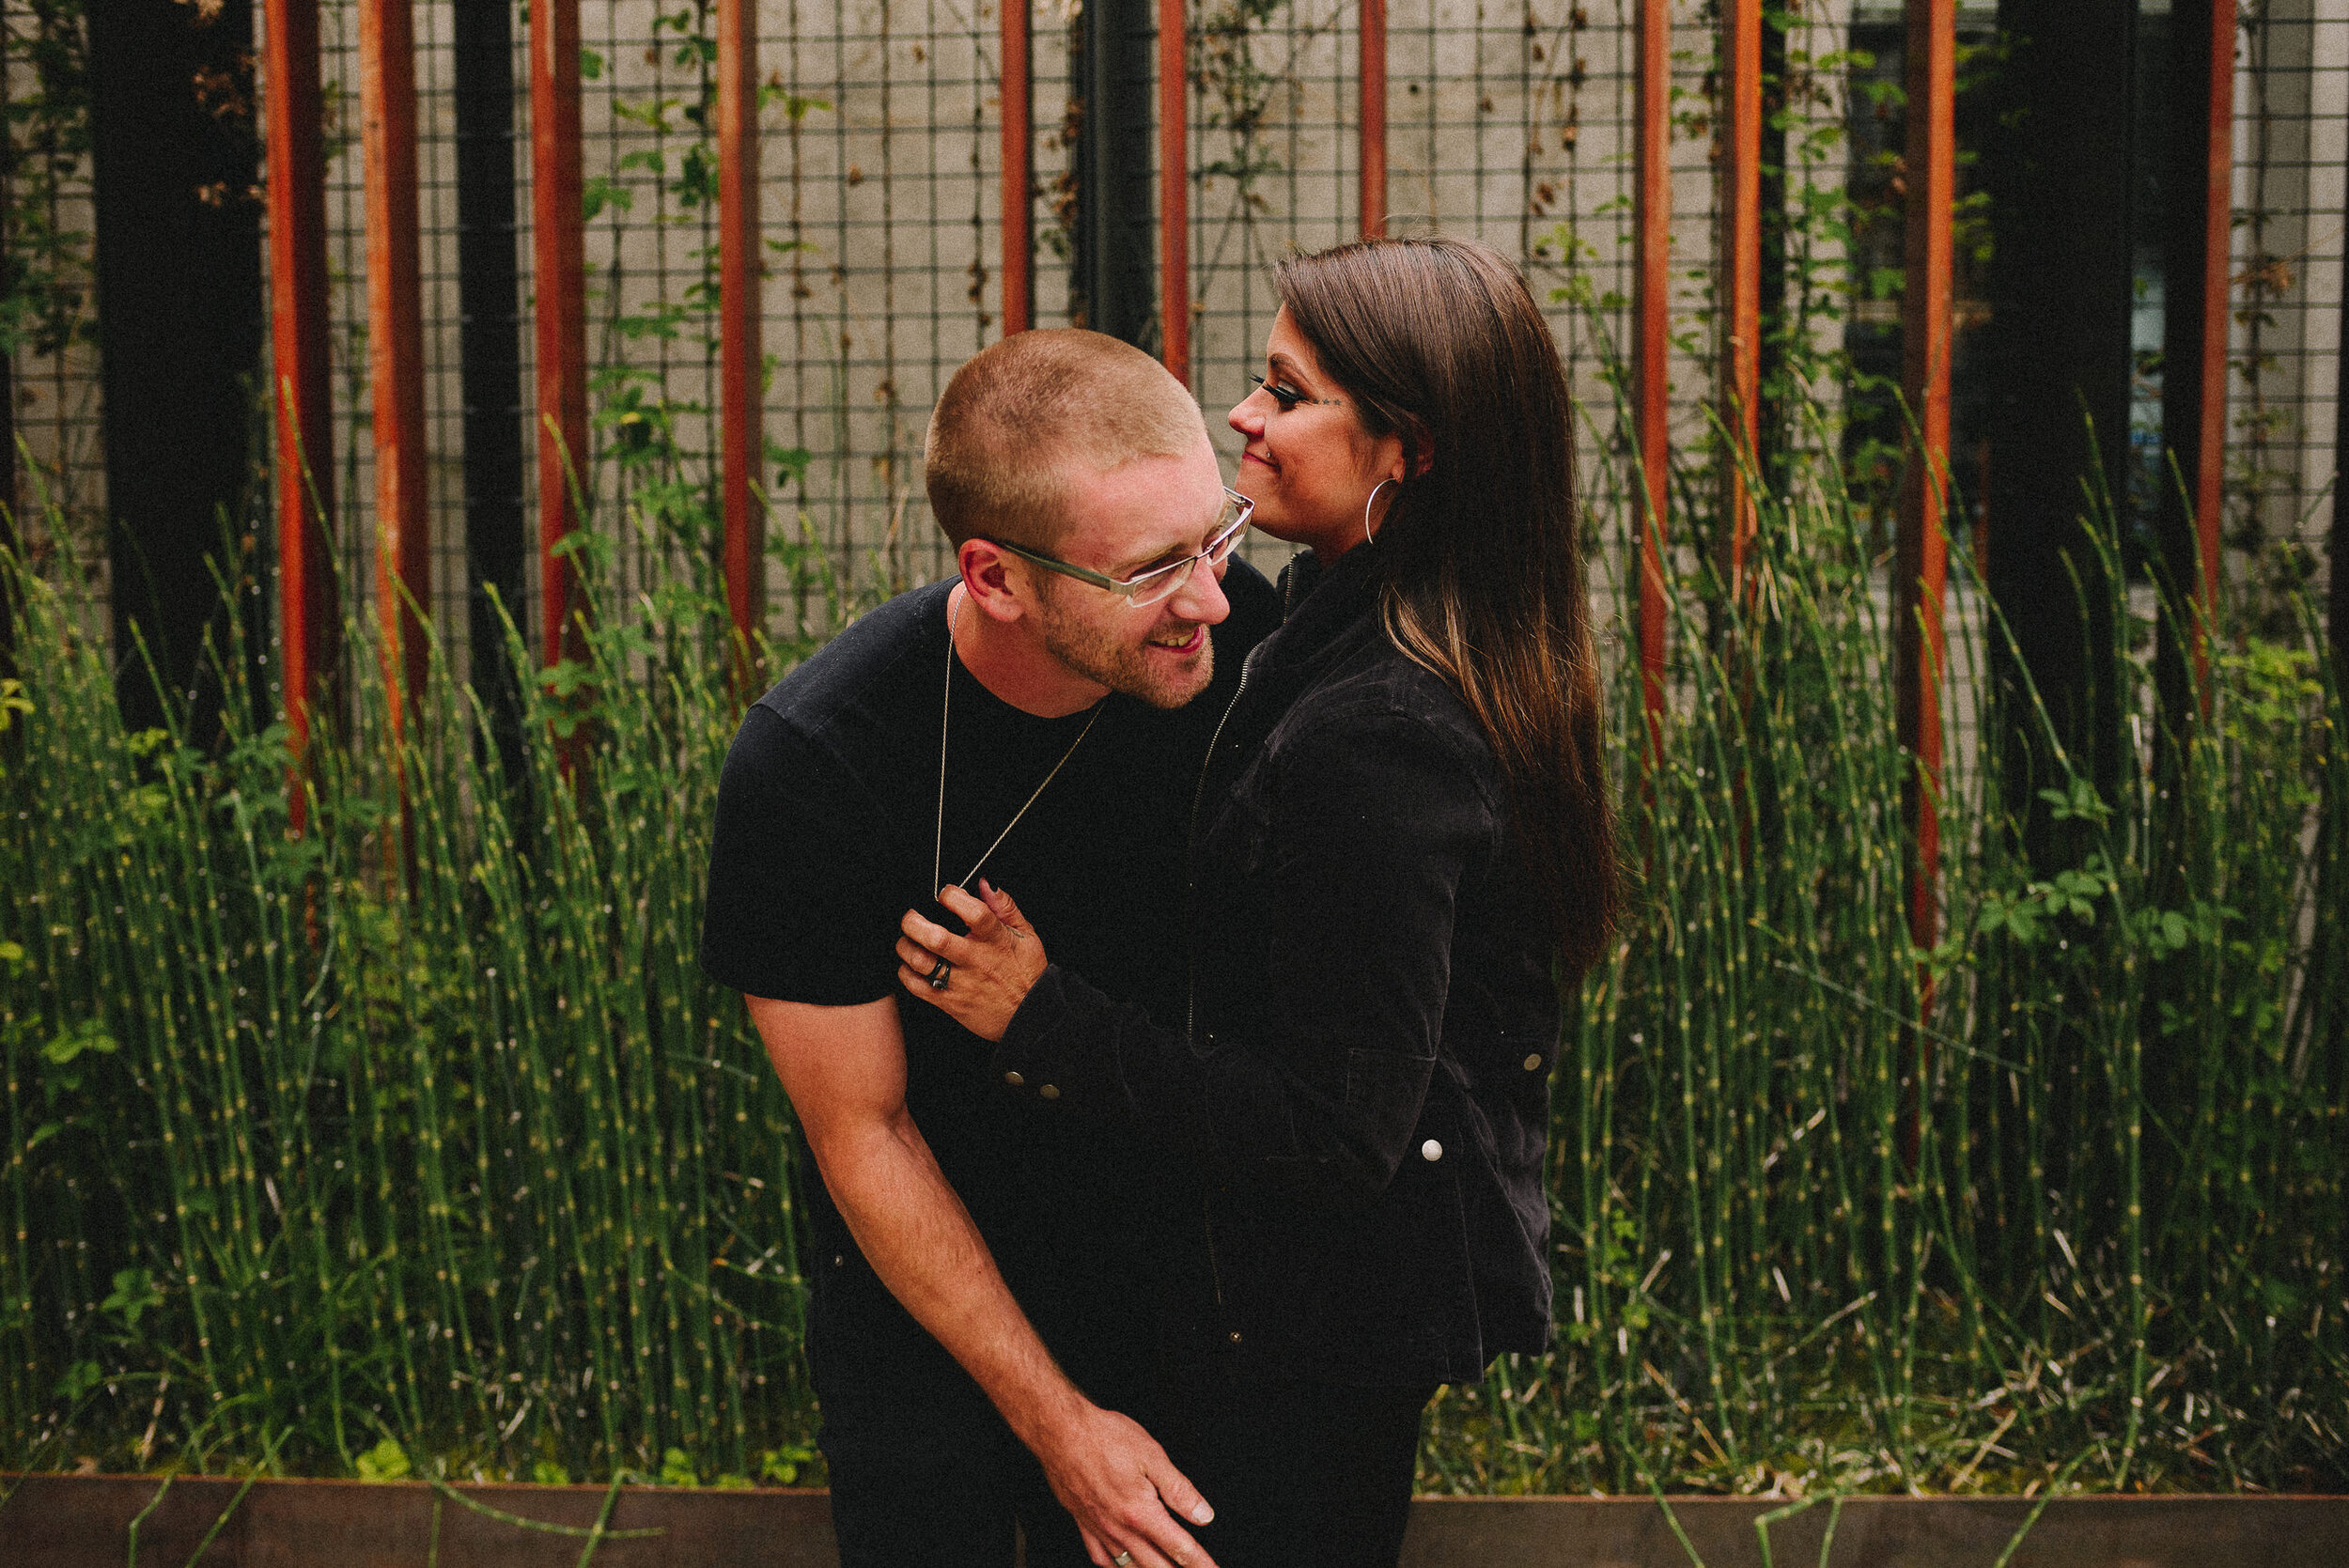 downtown-seattle-wa-engagement-session-way-up-north-photography (7).jpg